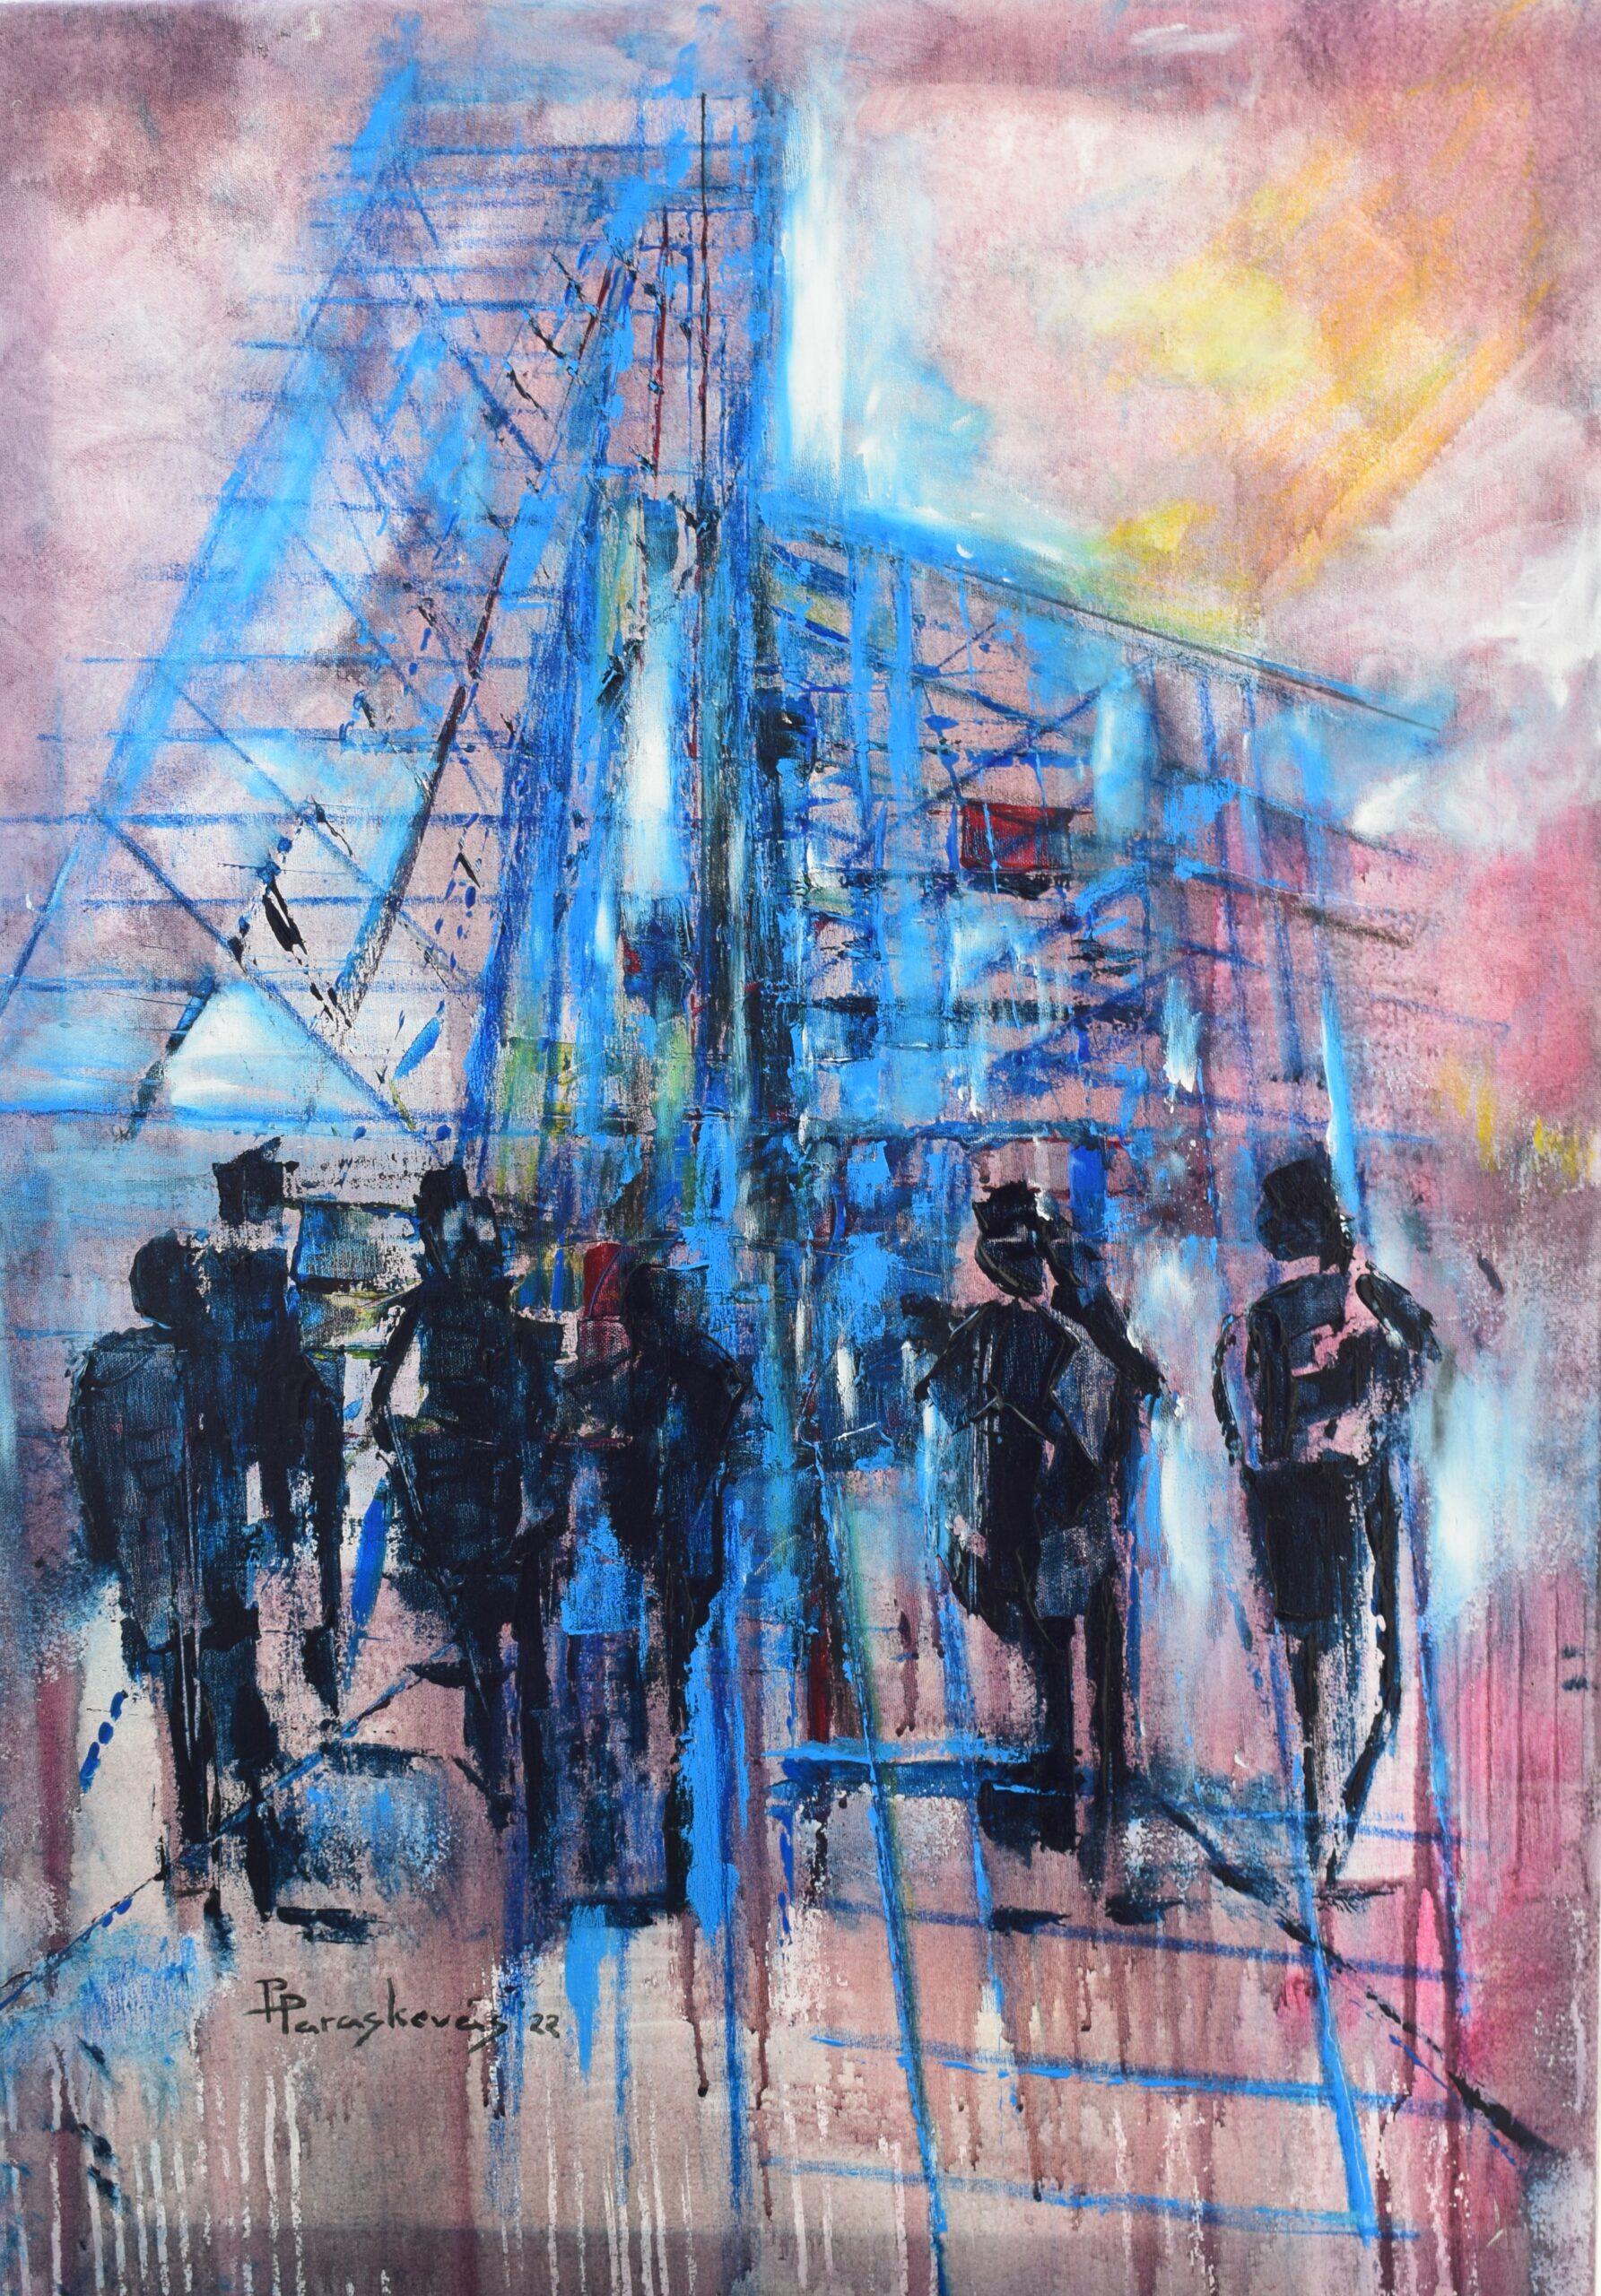 LIFE IN THE CITY - Painting by PARASKEVAS PAPADOPOULOS